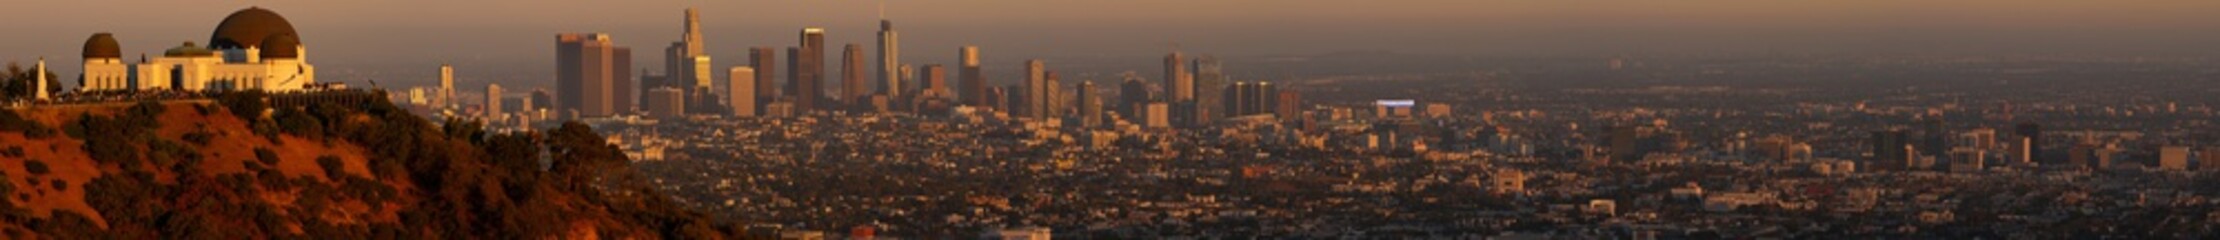 Panorama of Griffith Observatory with LA skyline in the background at sunset